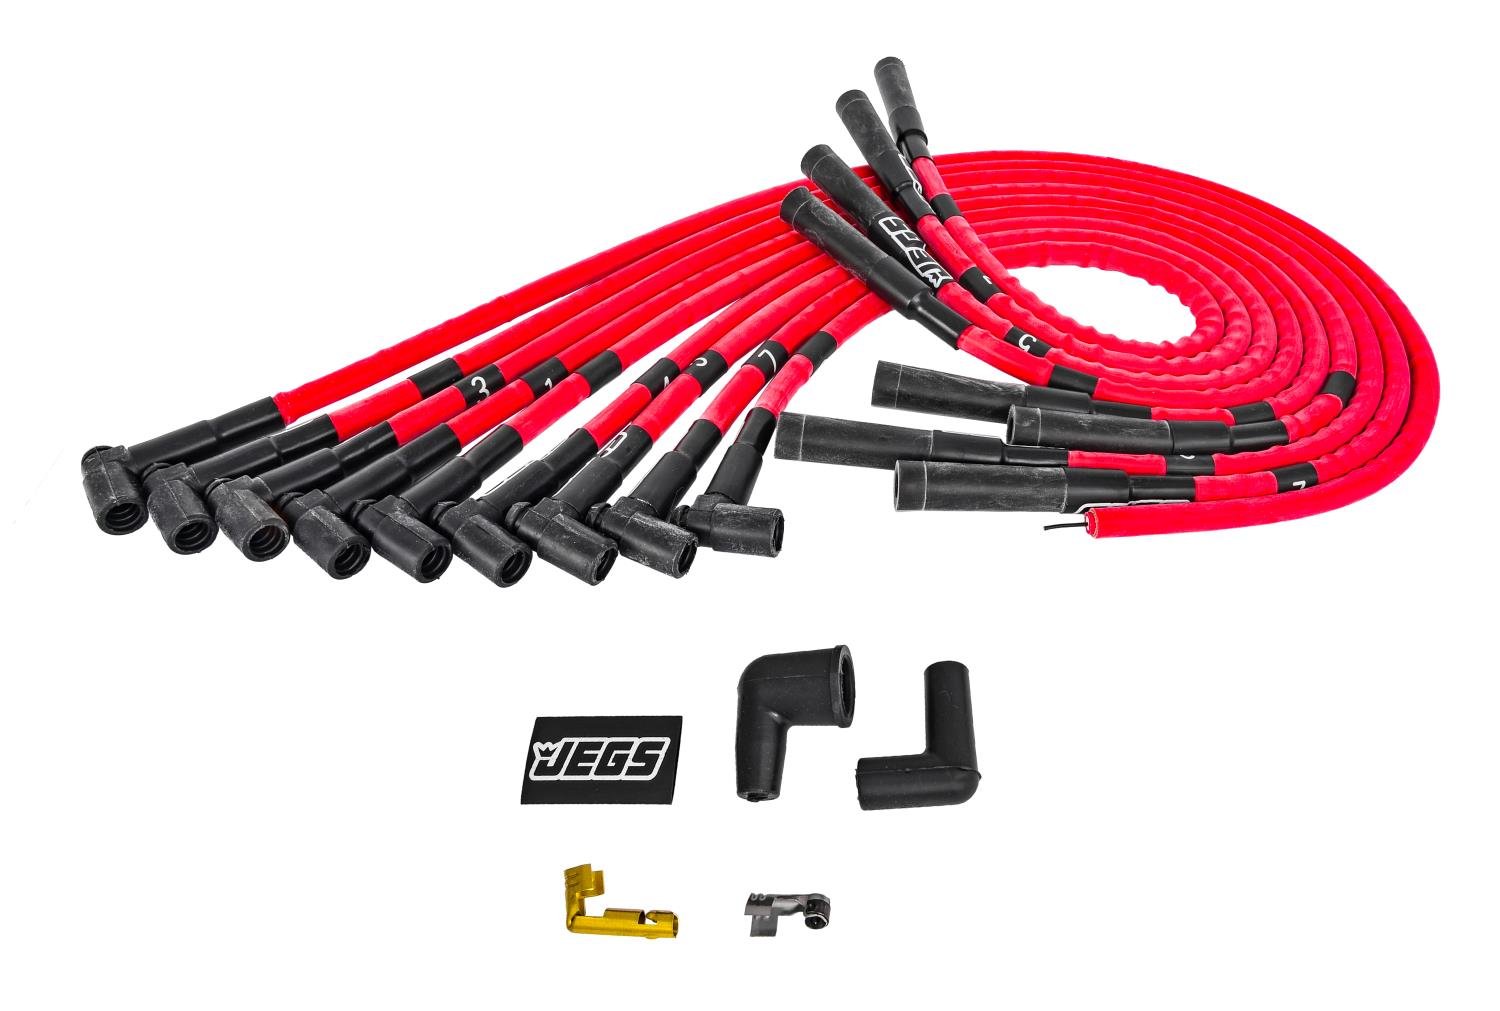 8mm Hi-Temp Sleeved Spark Plug Wire Set for Big Block Chevy 396, 402, & 454 w/HEI, Over Valve Cover w/Straight Boots [Red]